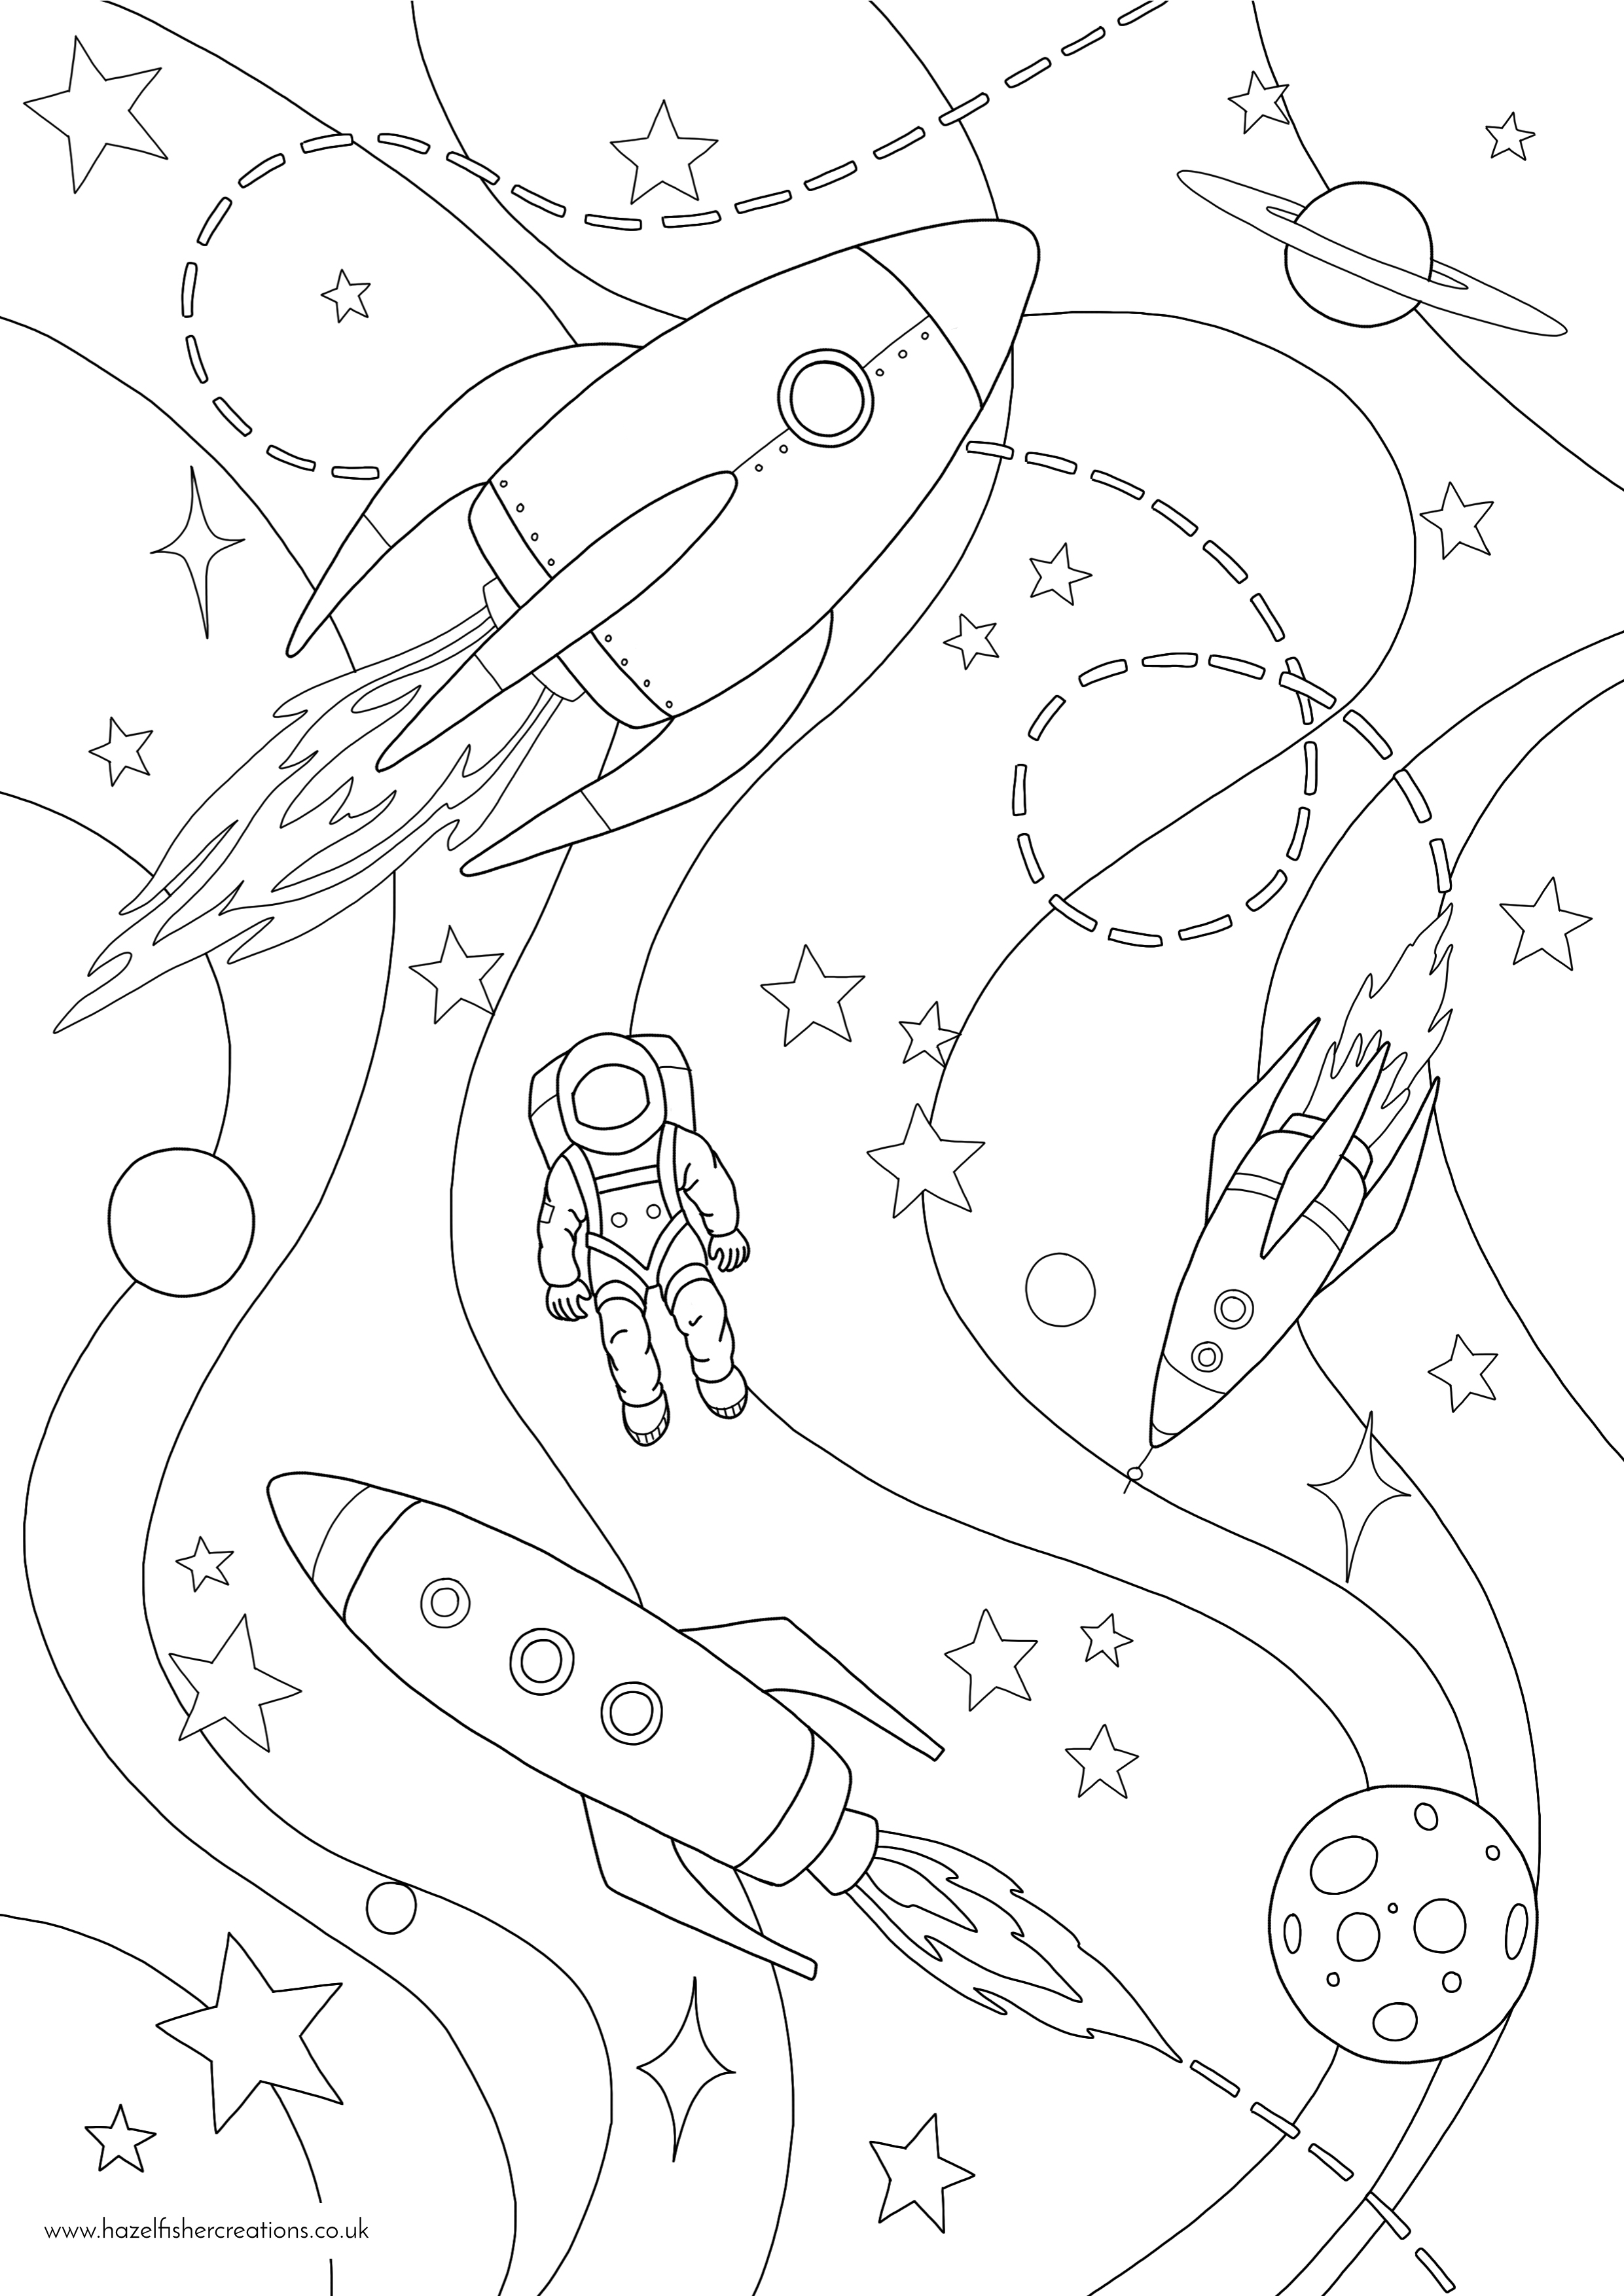 Rockets Colouring In Activity Sheet   image